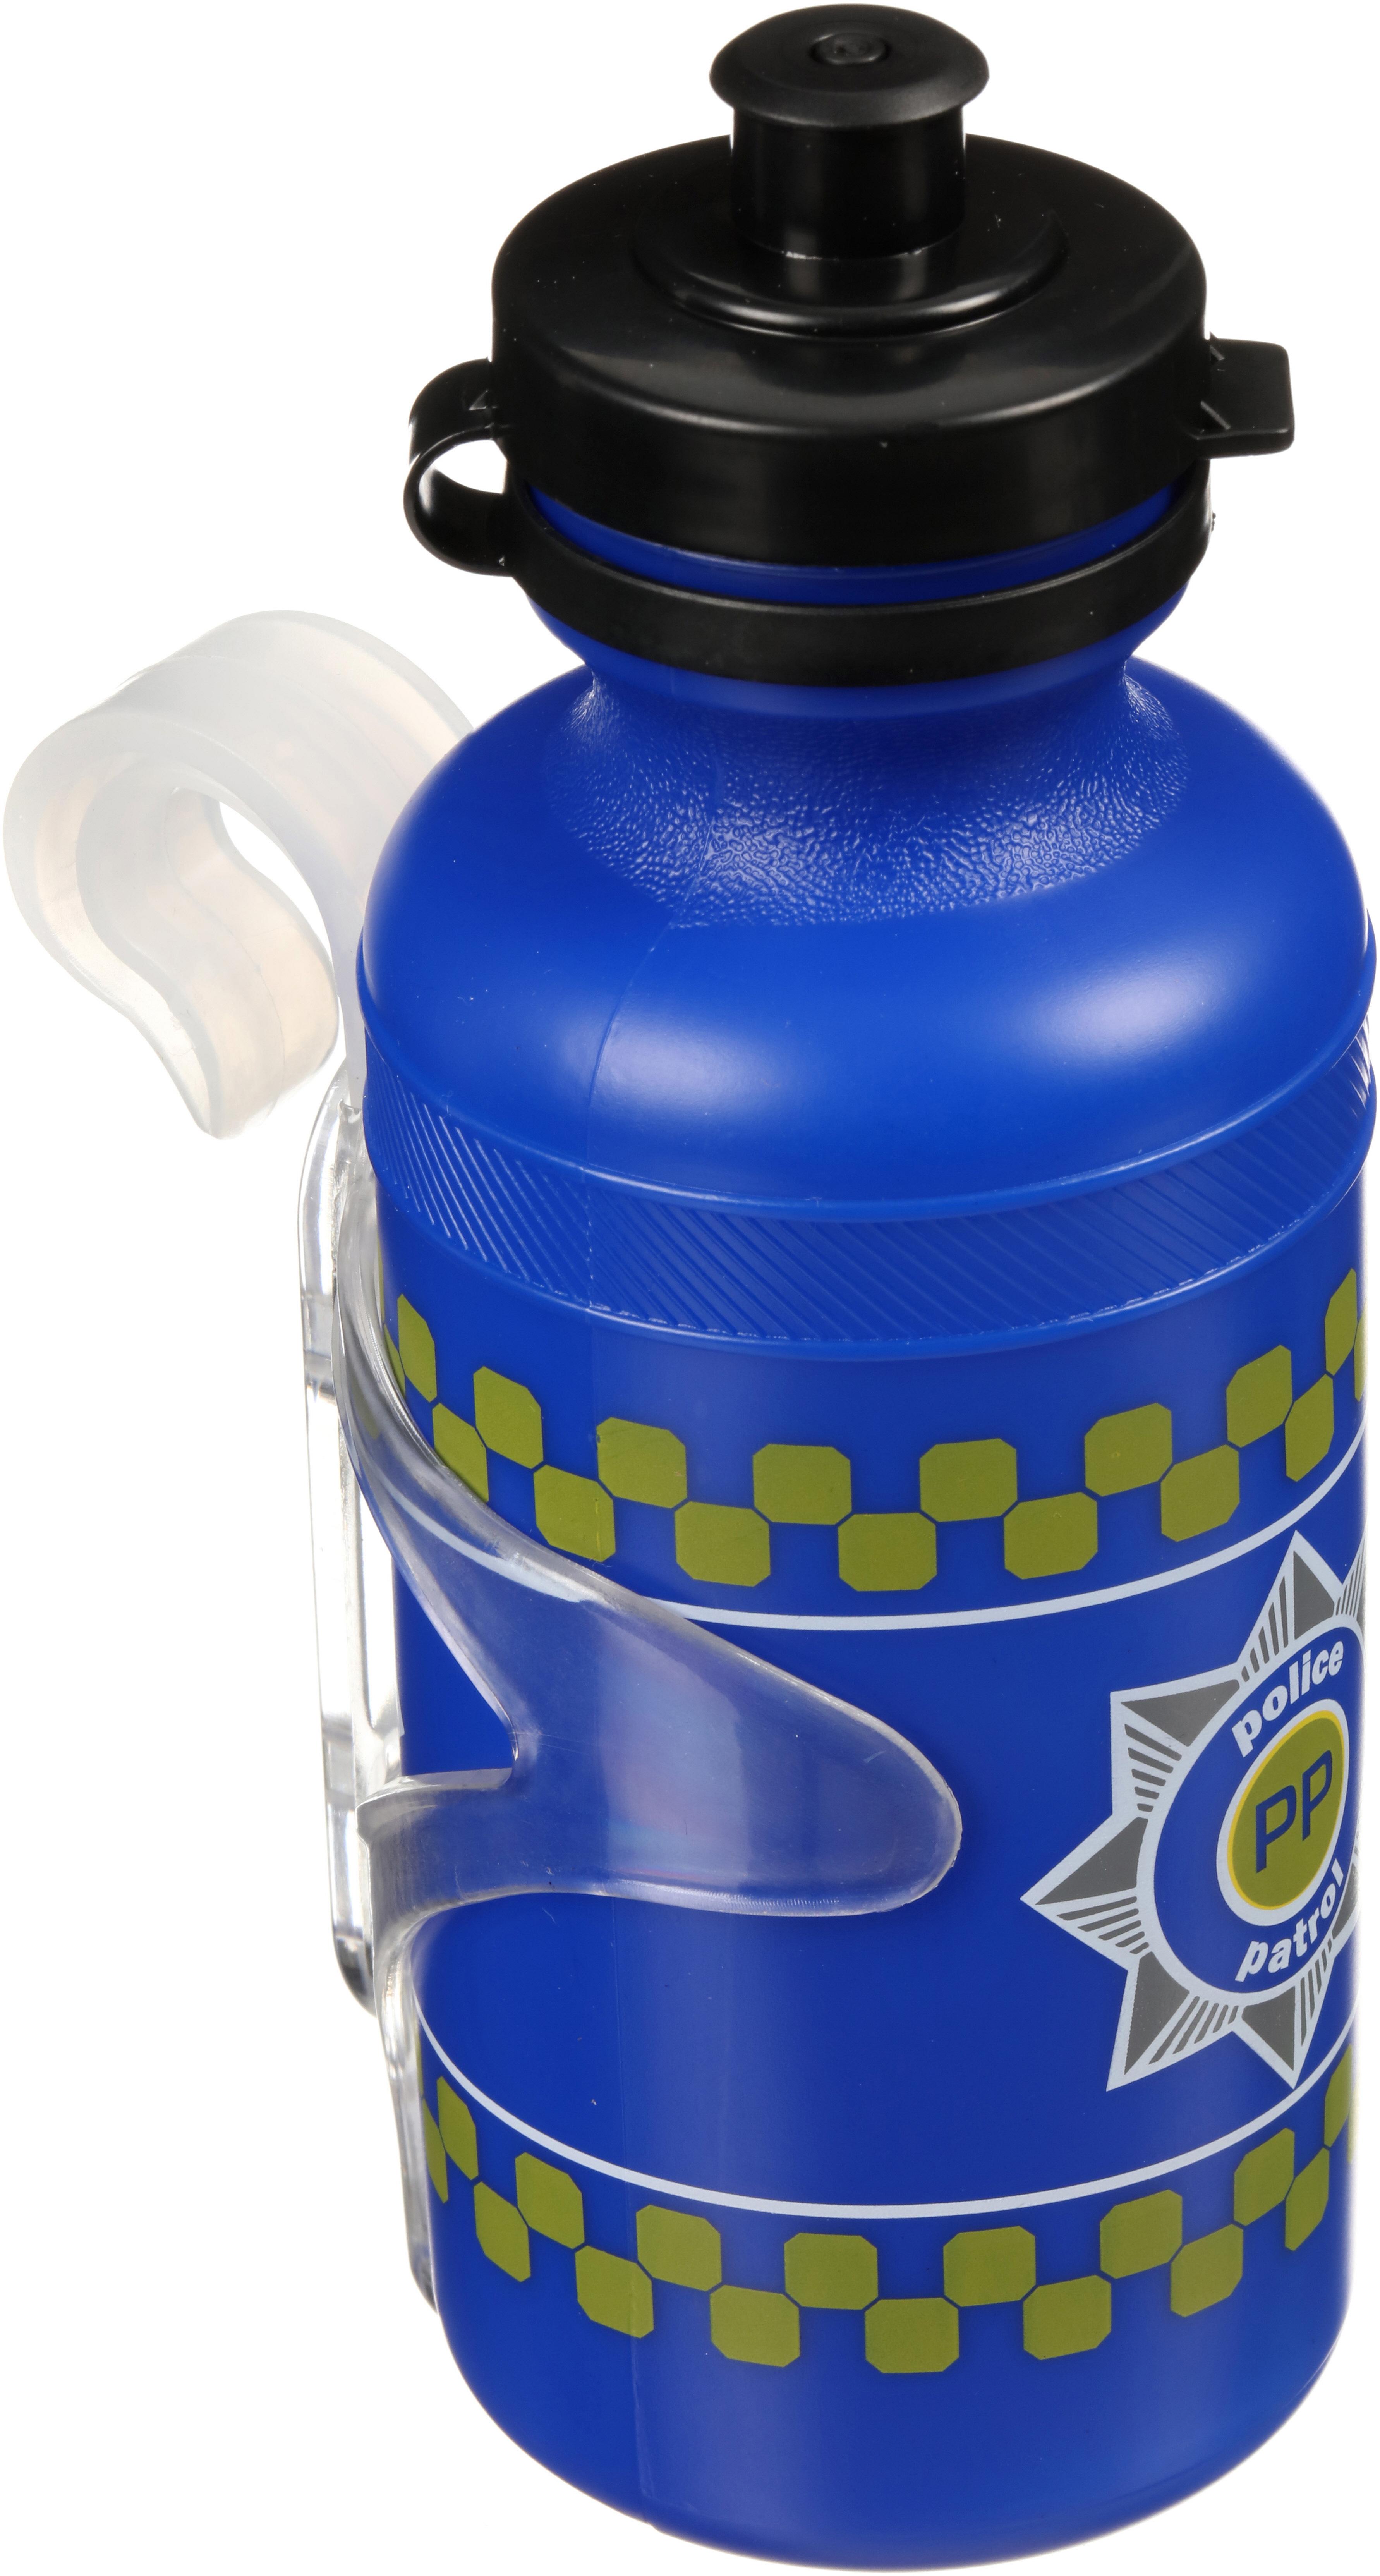 Apollo Police Bottle With Handlebar Carrier